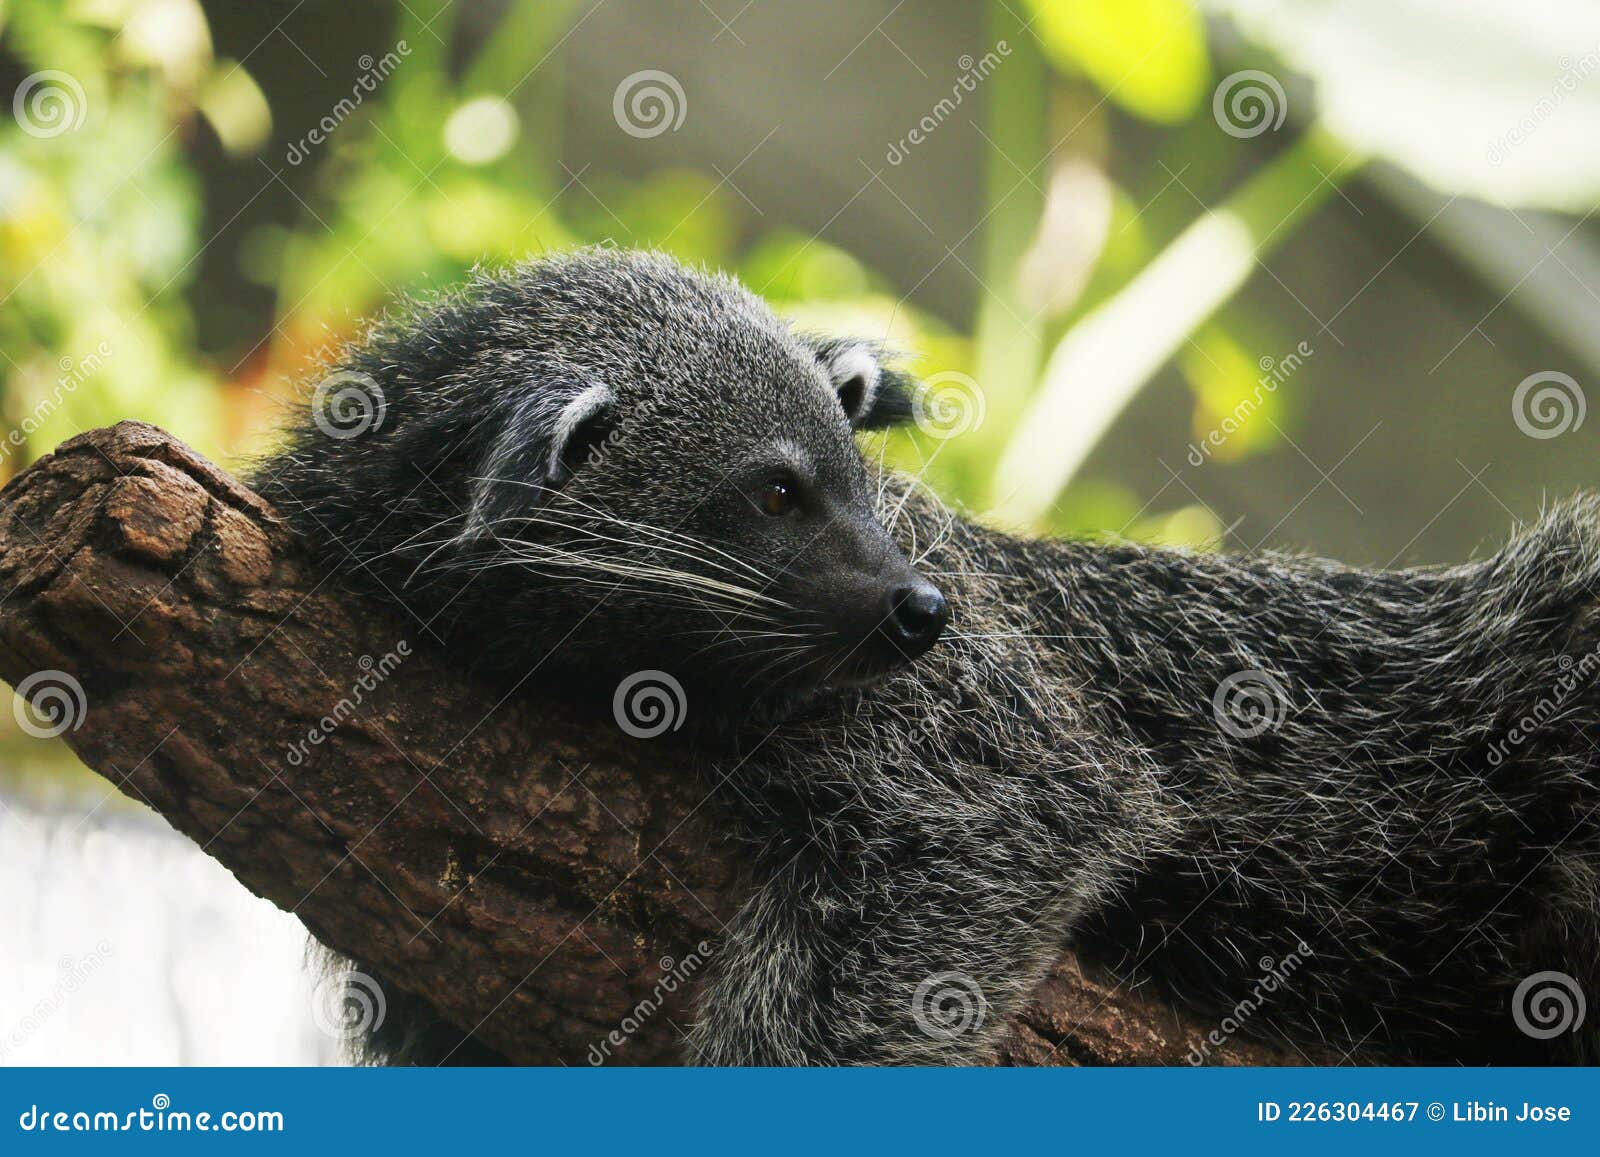 Asian Palm Civet Also Called Common Palm Civet Toddy Cat And Musang Lying On A Tree Stock Image Image Of Musanglying Dark 226304467